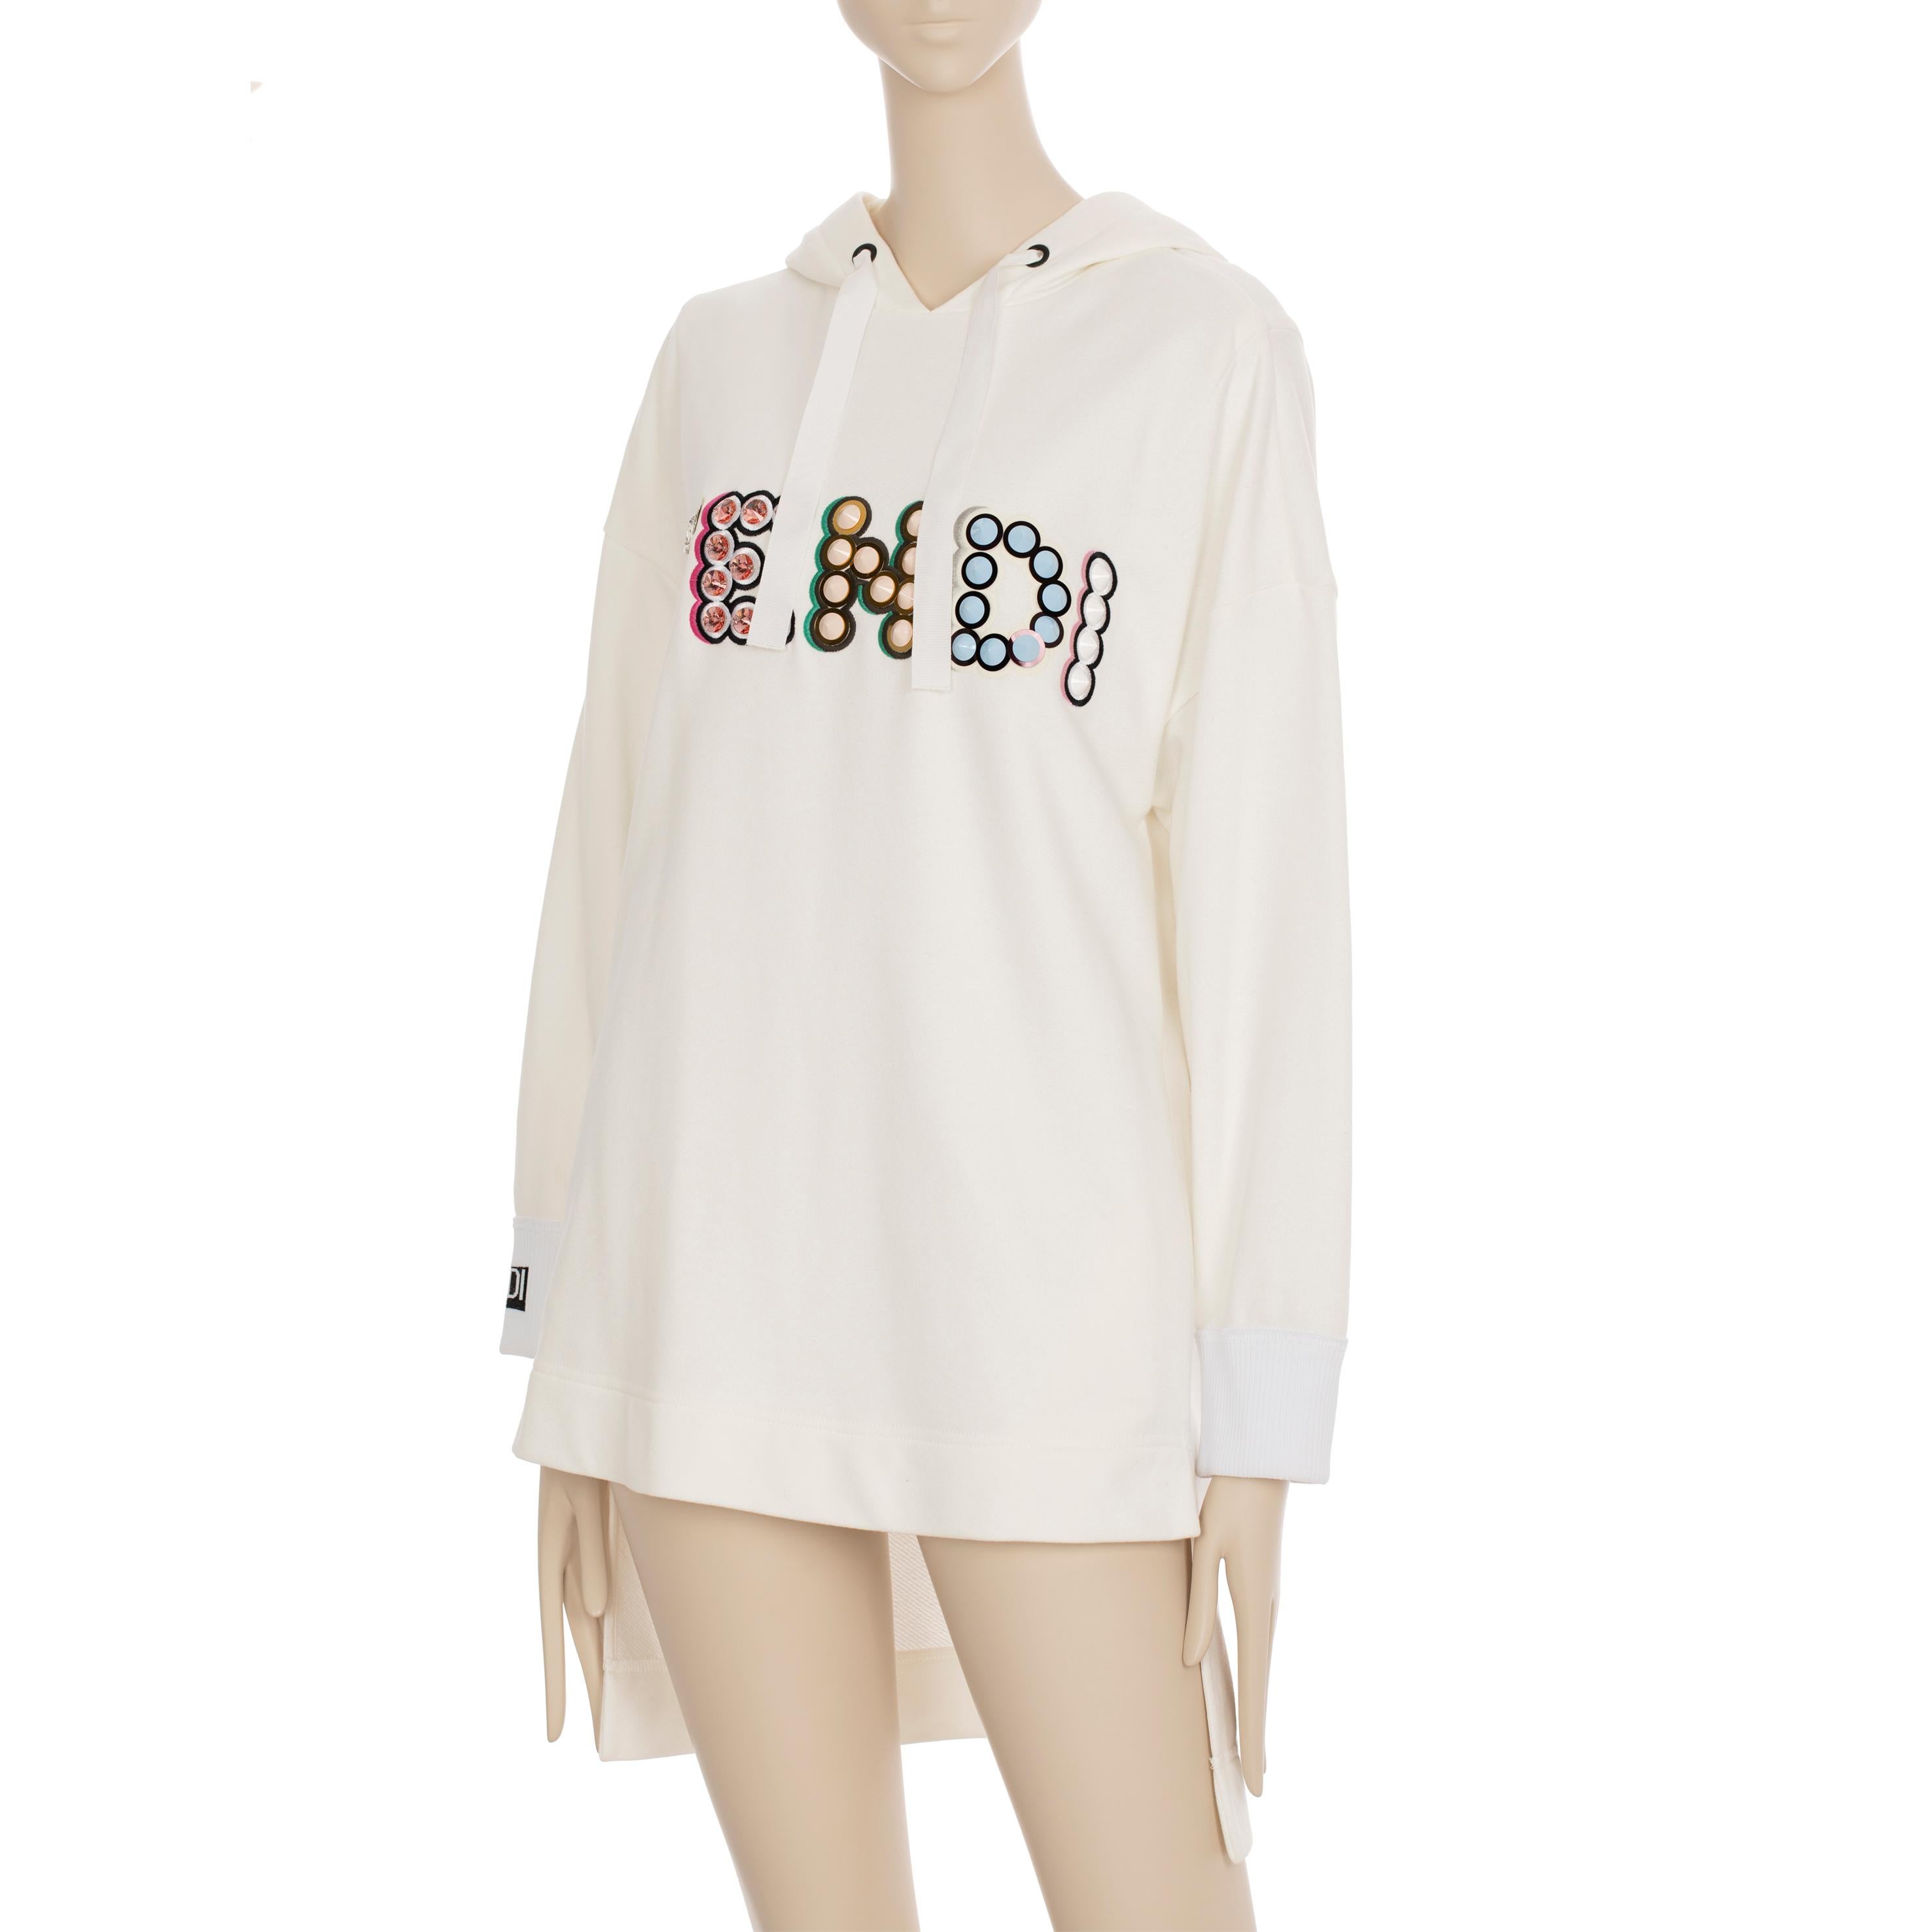 Fendi Oversized Hooded Sweater With Logo Details 38 IT In Excellent Condition For Sale In DOUBLE BAY, NSW